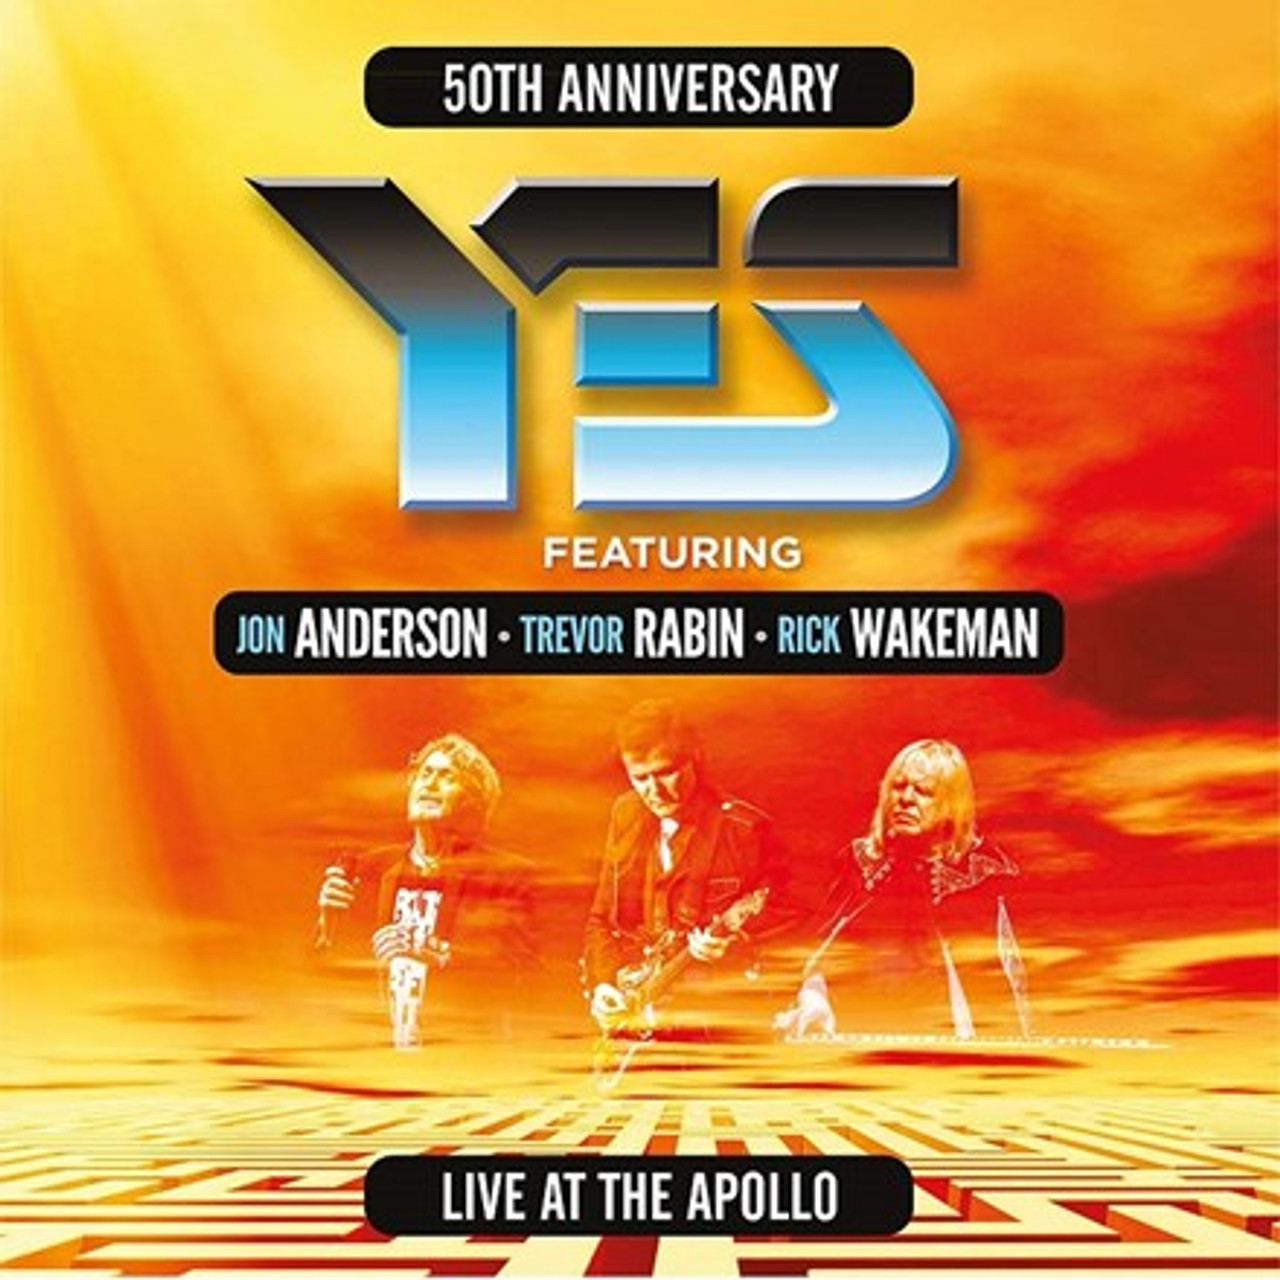 Yes featuring Jon Anderson, Trevor Rabin, Rick Wakeman Live at the